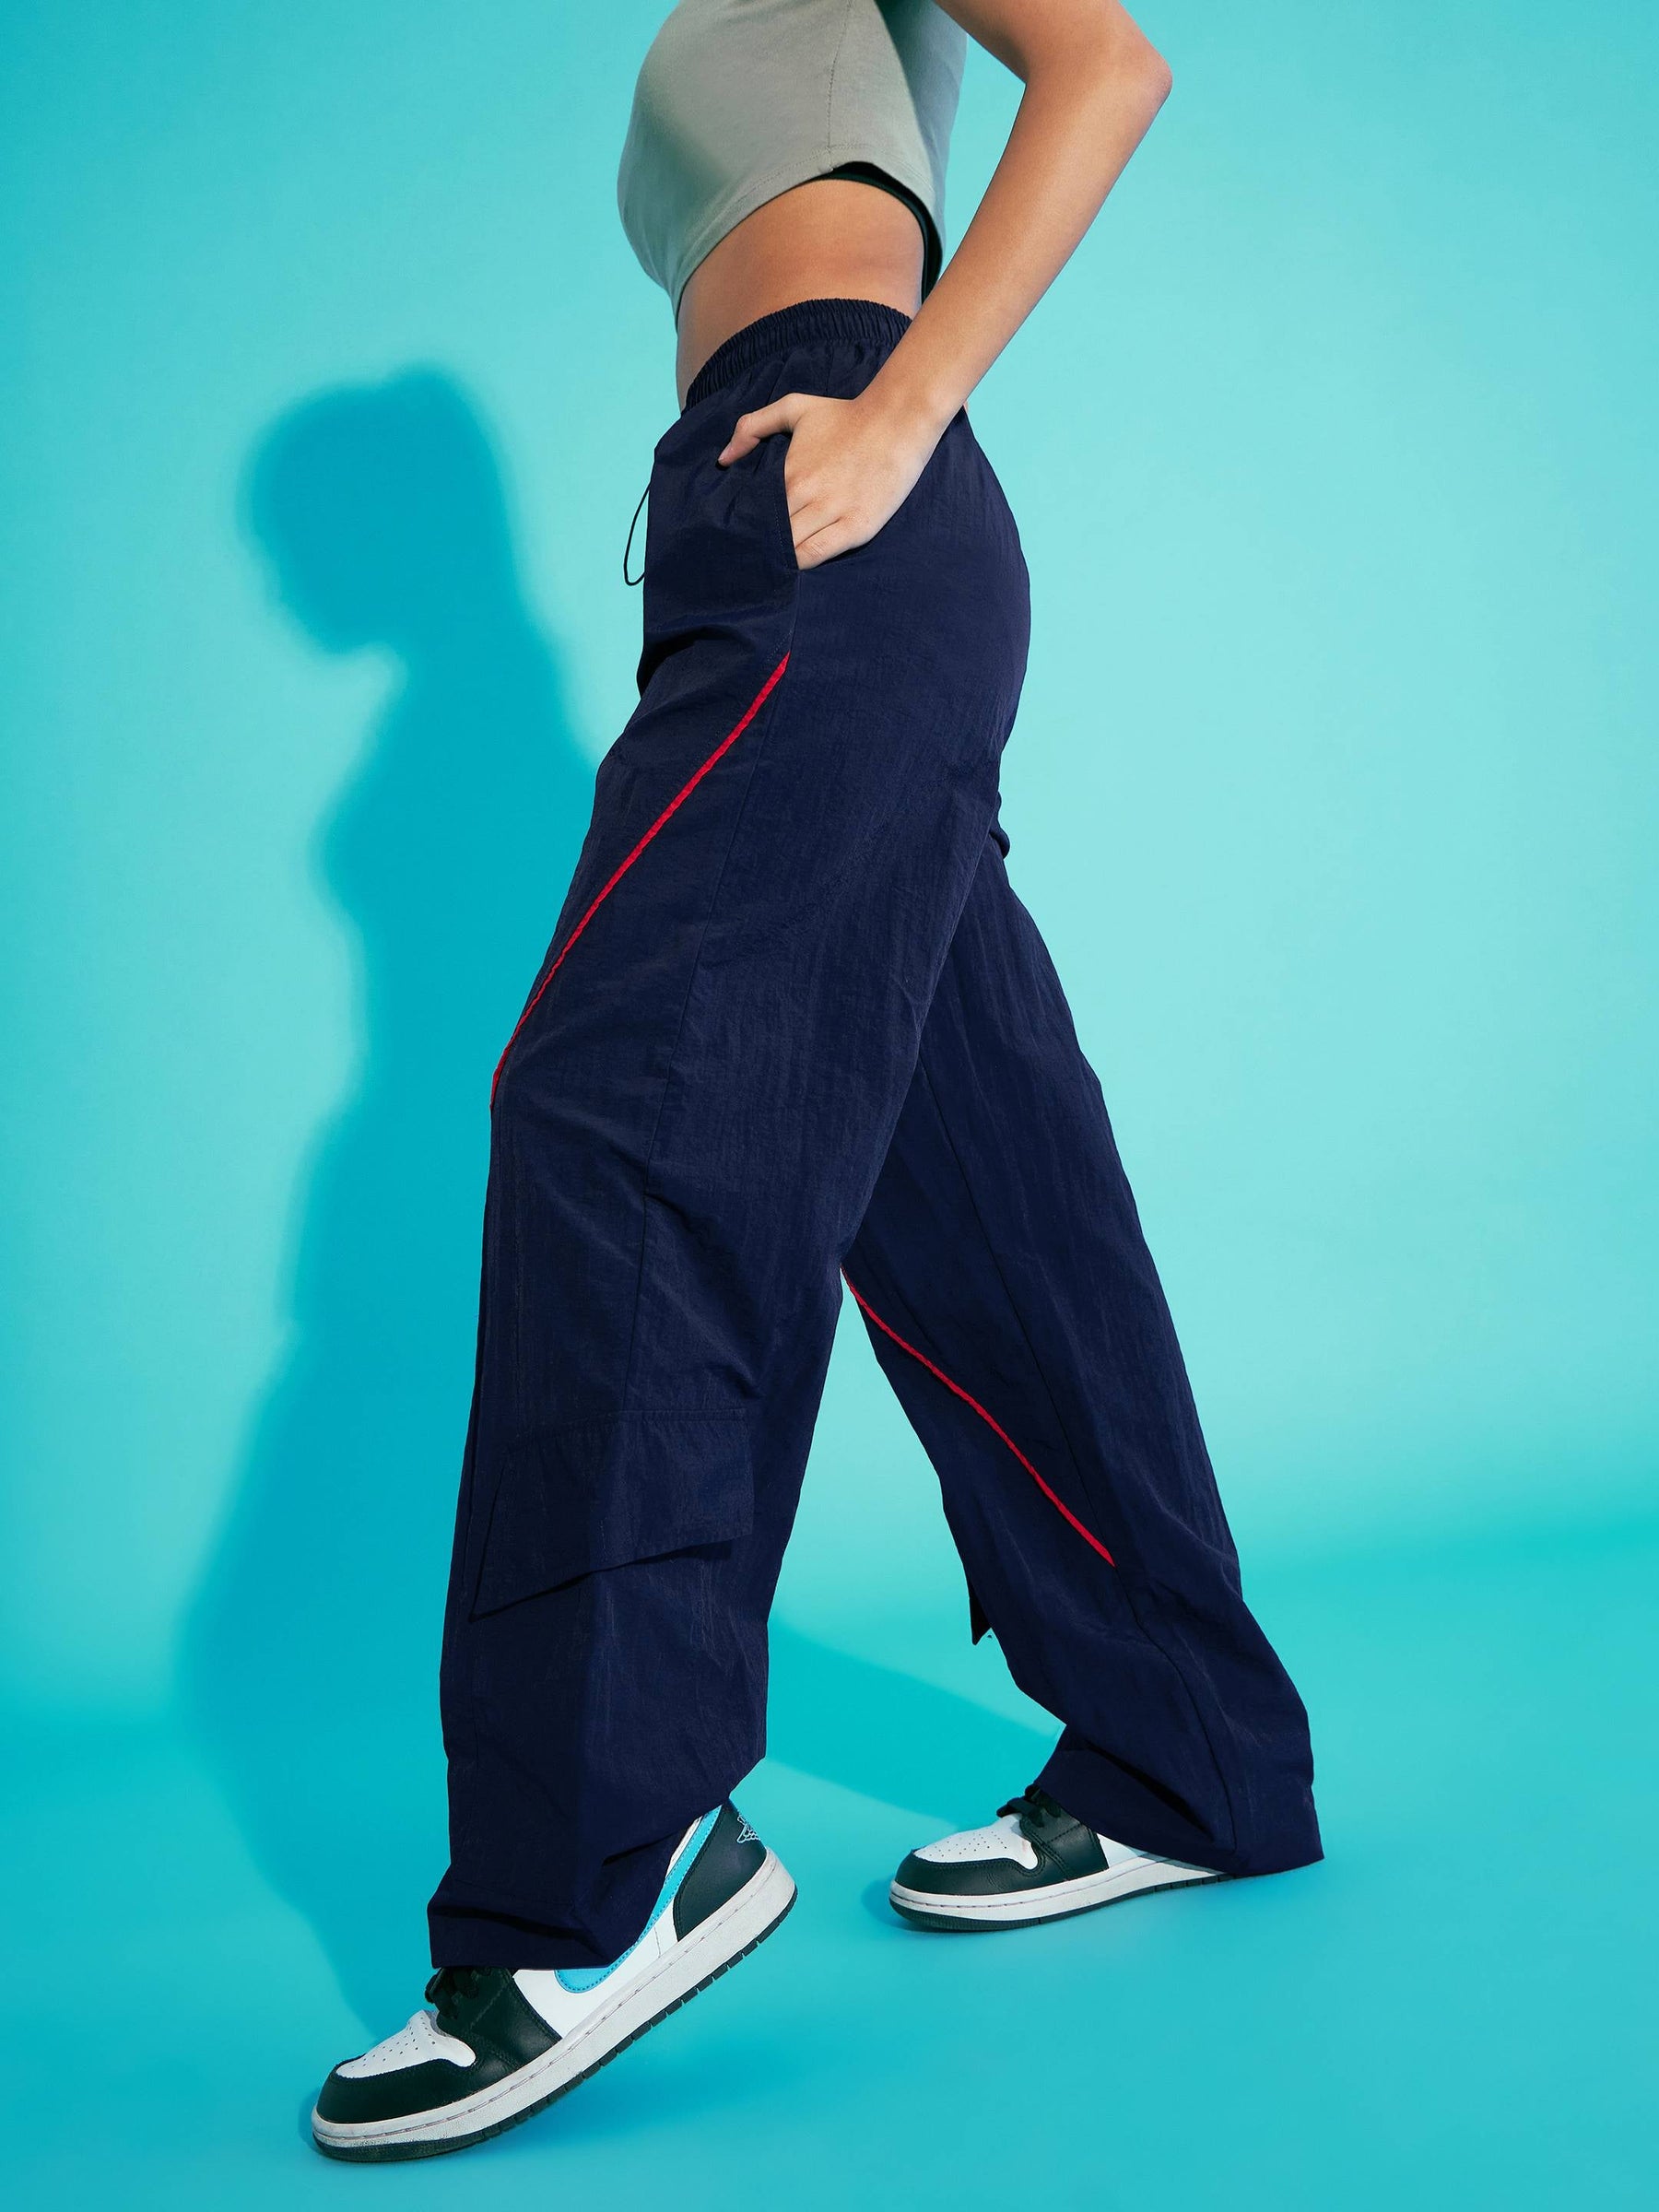 Navy Blue Contrast Piping Cargo Parachute Pants-Noh.Voh